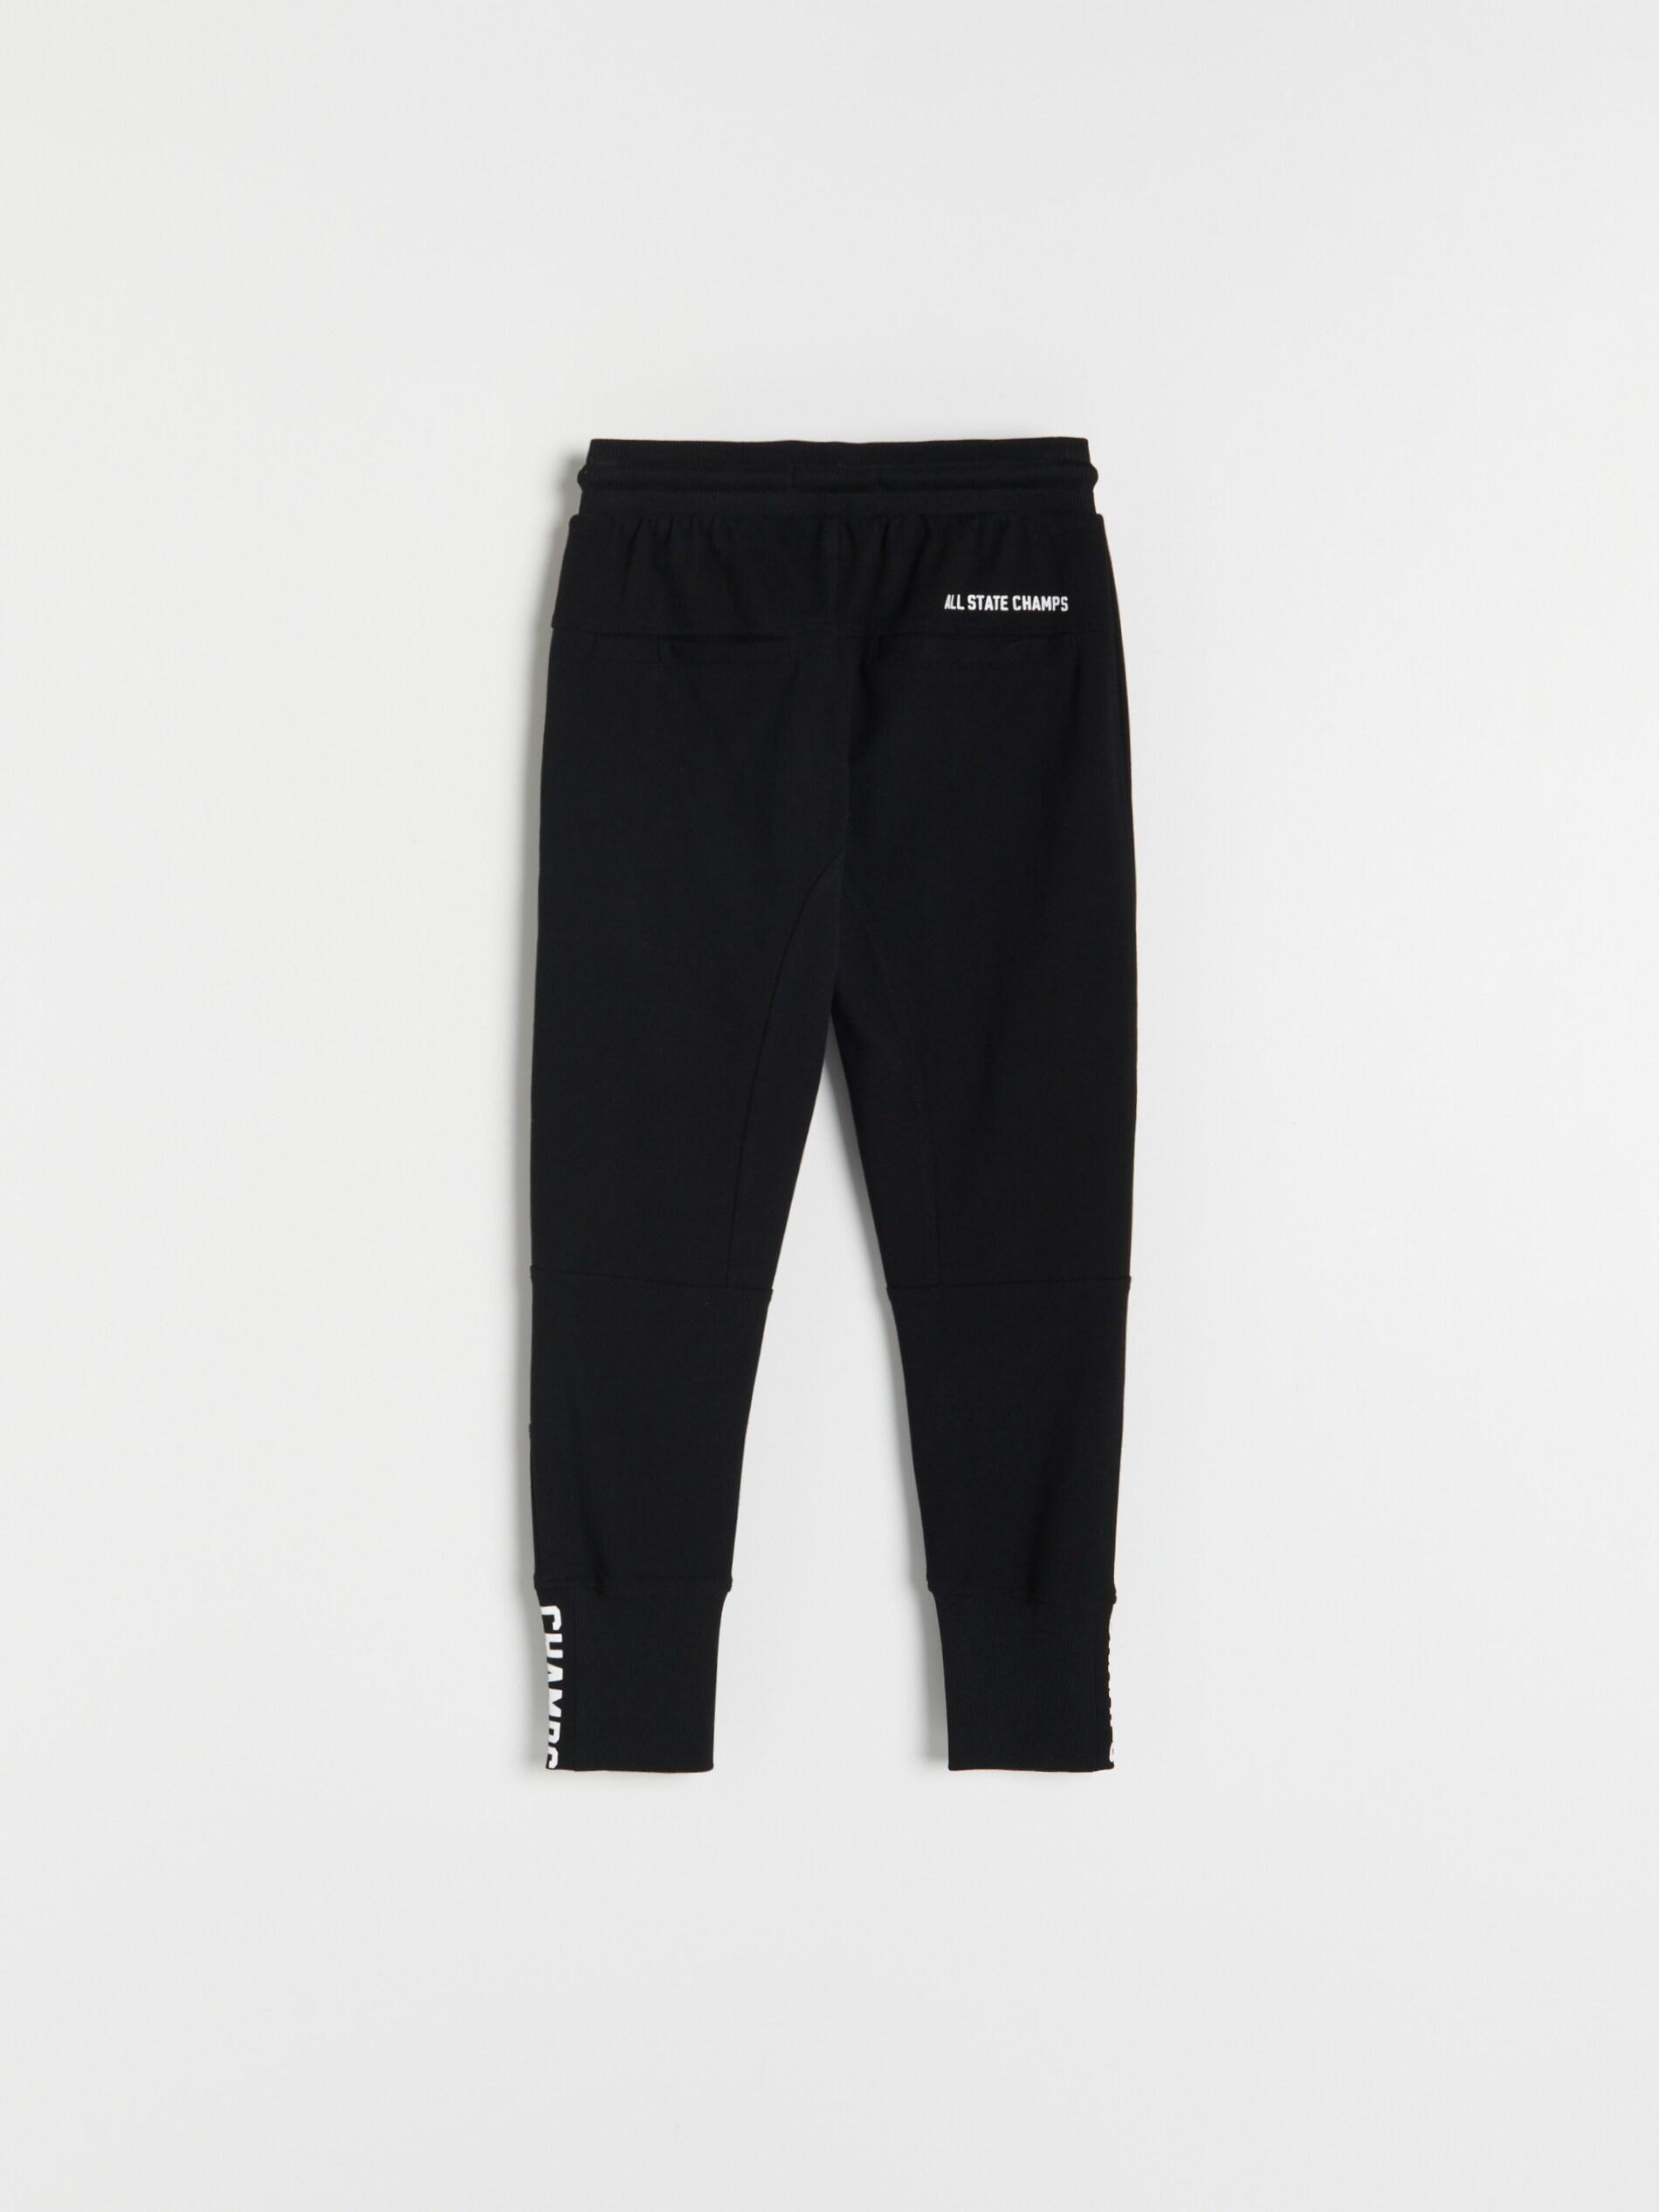 Reserved - Black Joggers With Pockets, Kids Boy